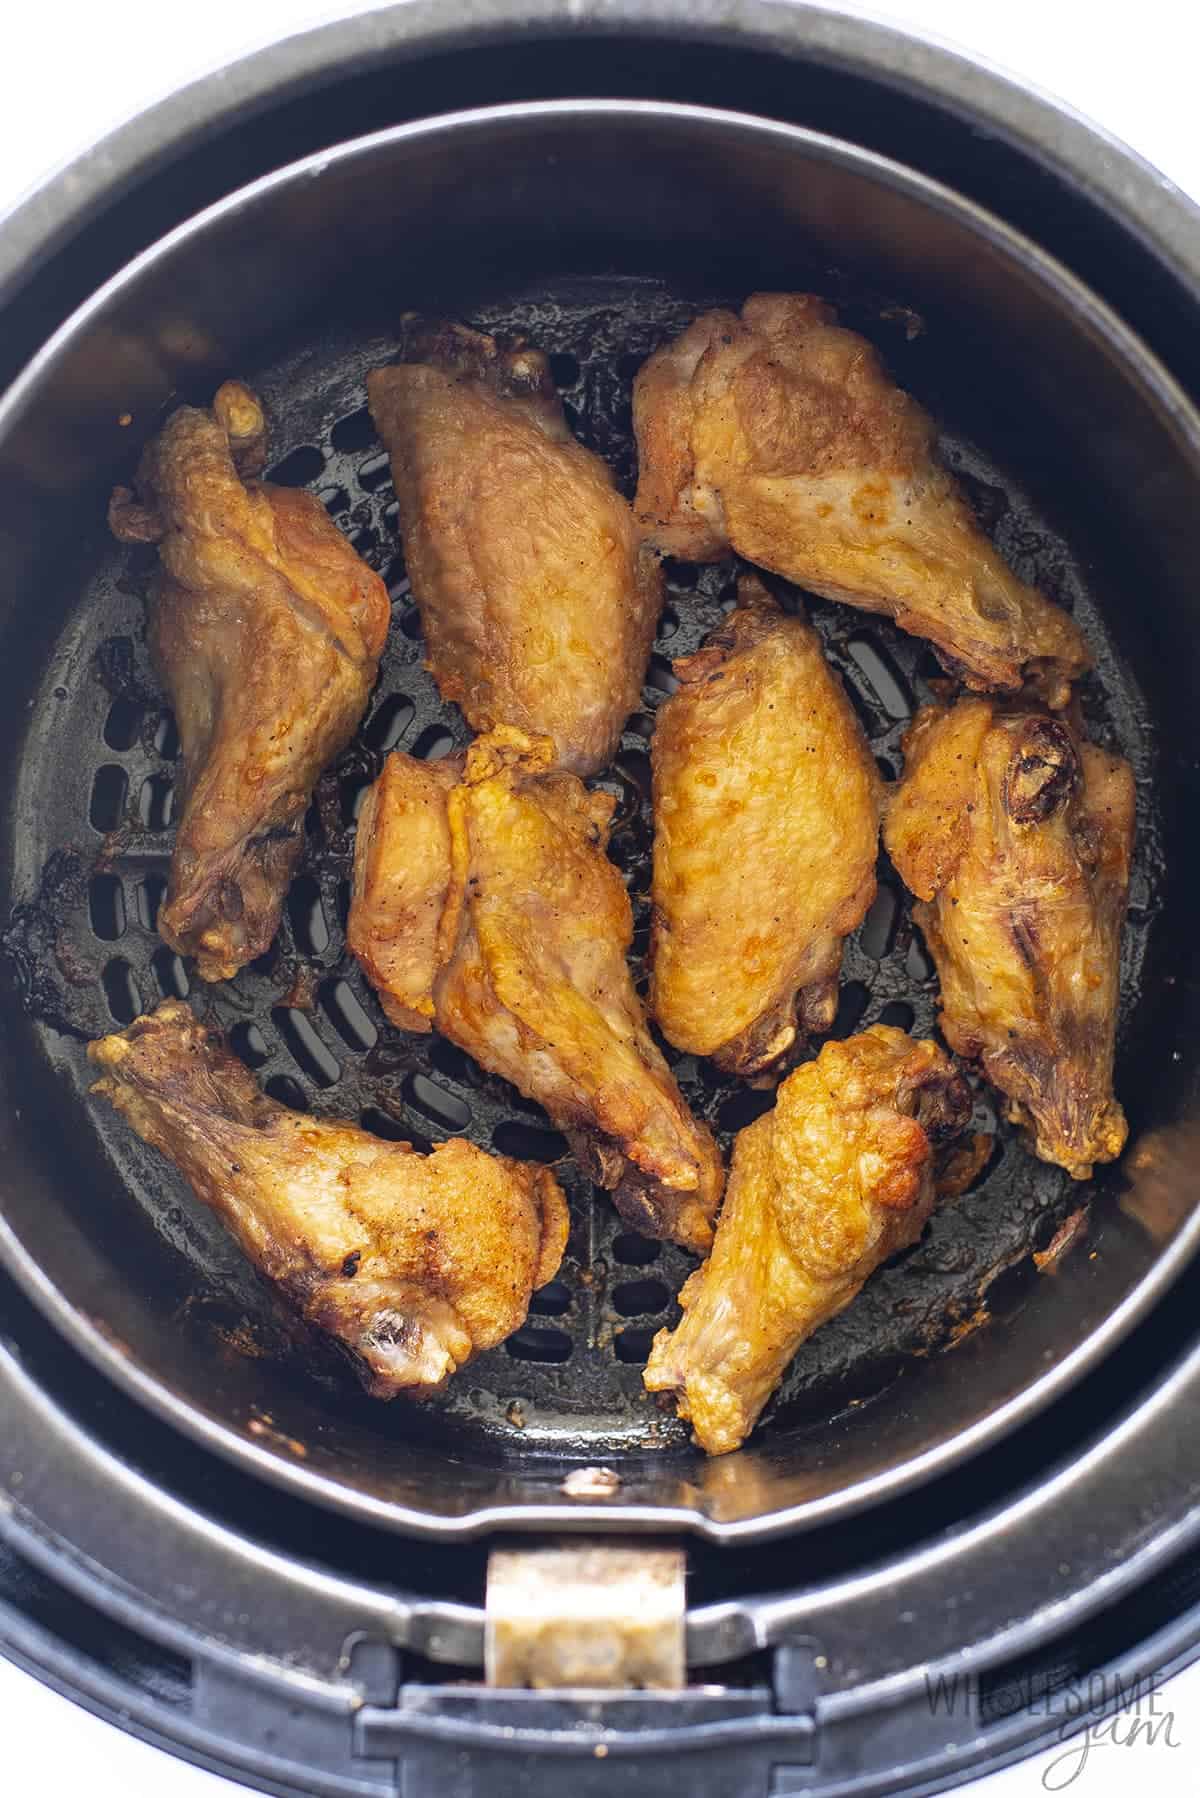 Cooked chicken wings in the air fryer